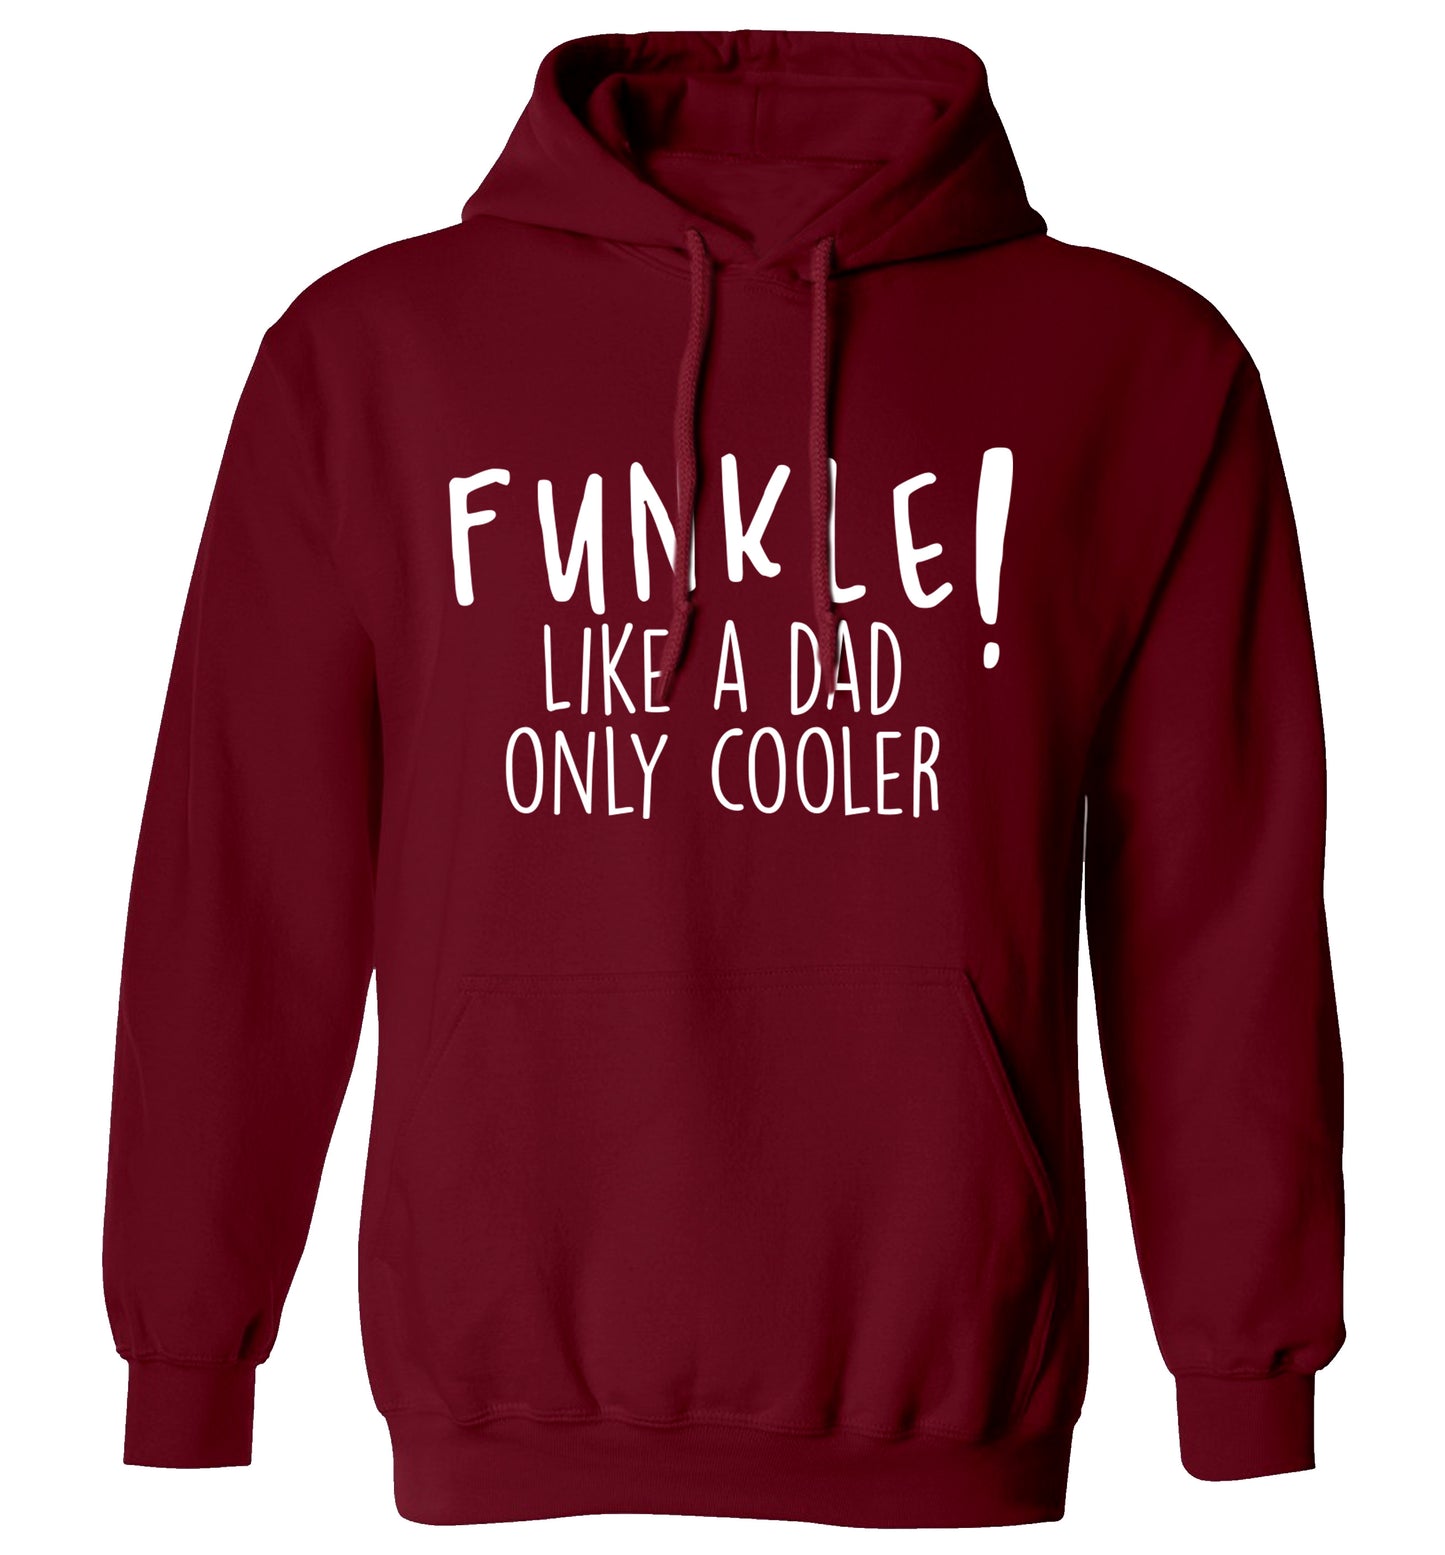 Funkle Like a Dad Only Cooler adults unisex maroon hoodie 2XL